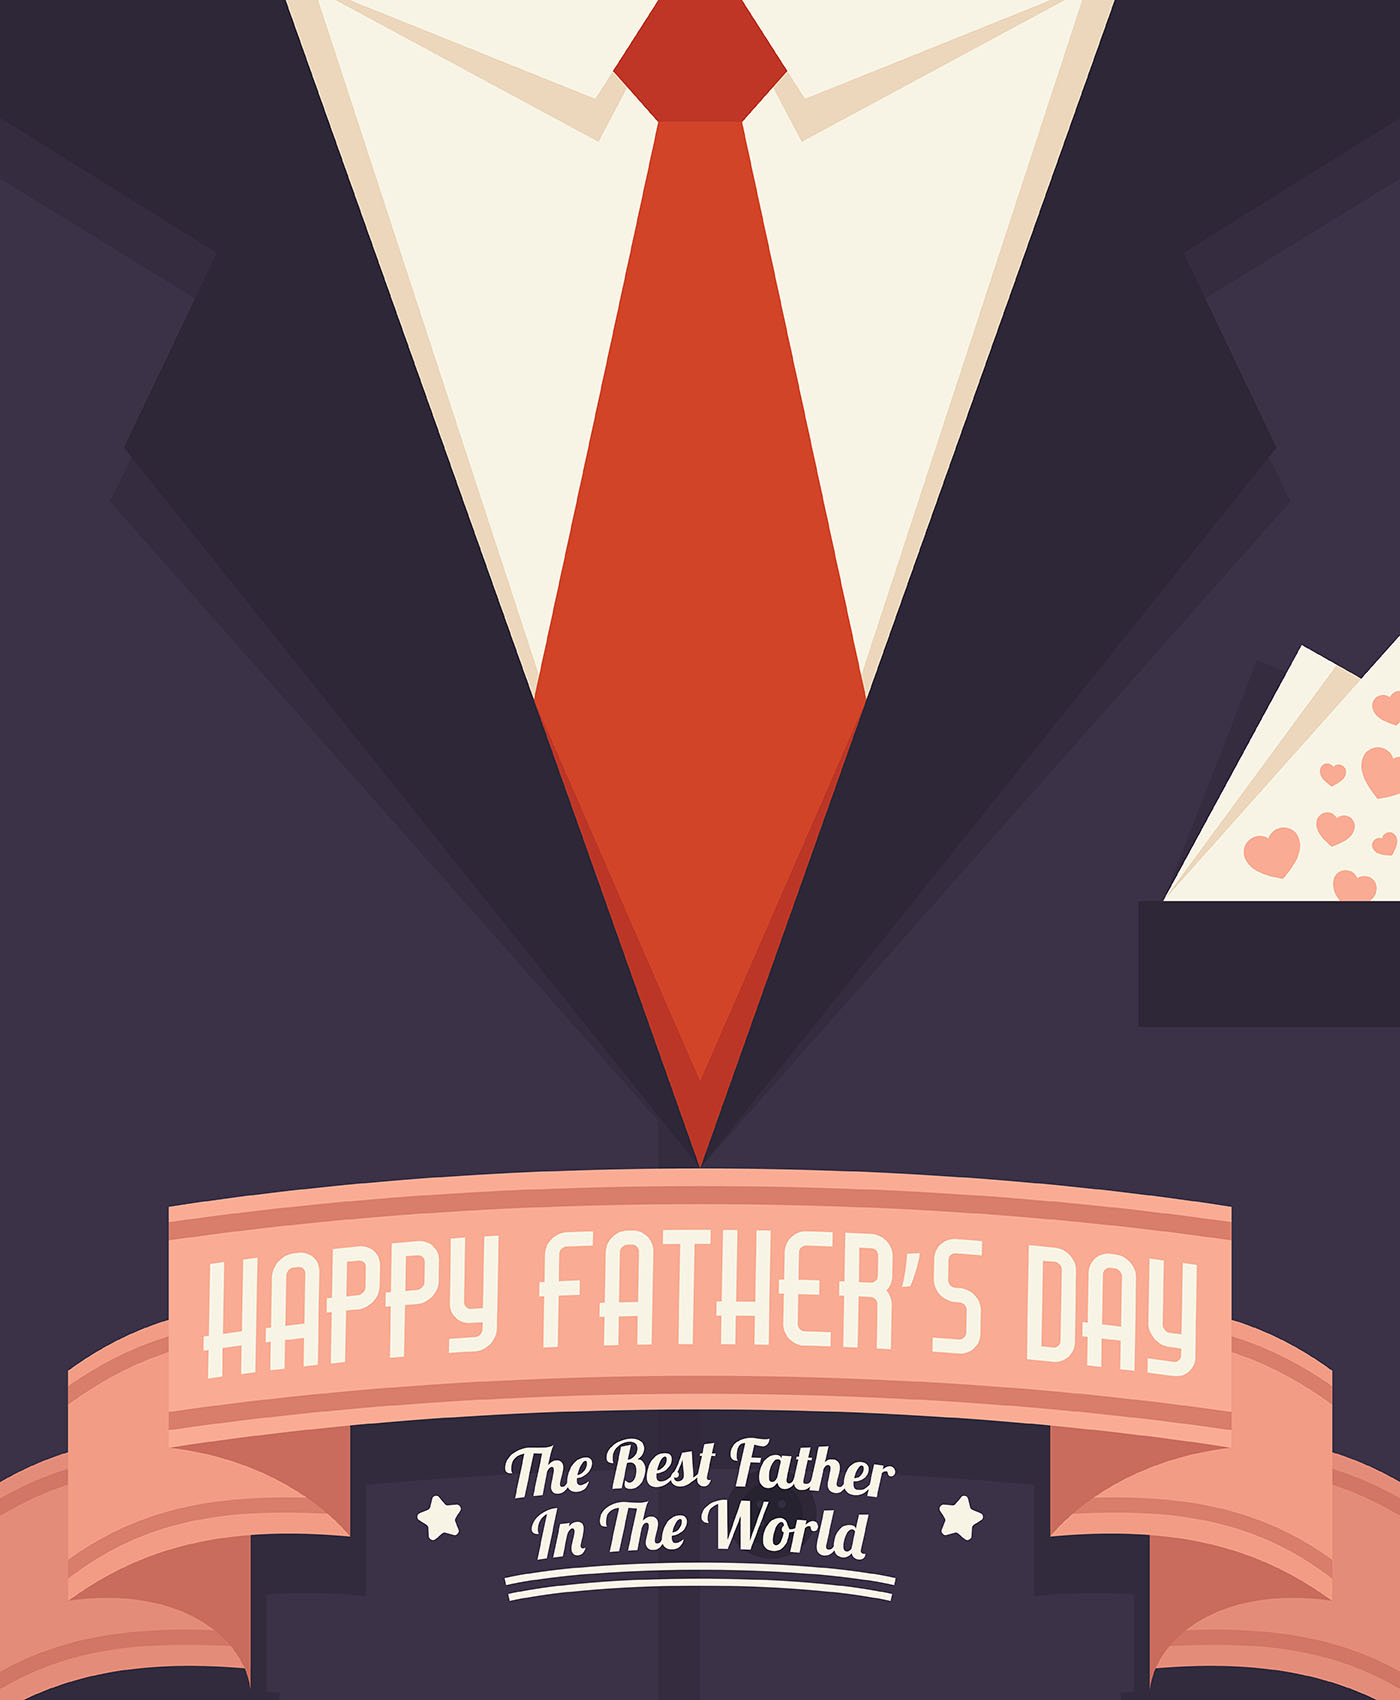 Download Happy Fathers Day Illustration 206092 - Download Free Vectors, Clipart Graphics & Vector Art